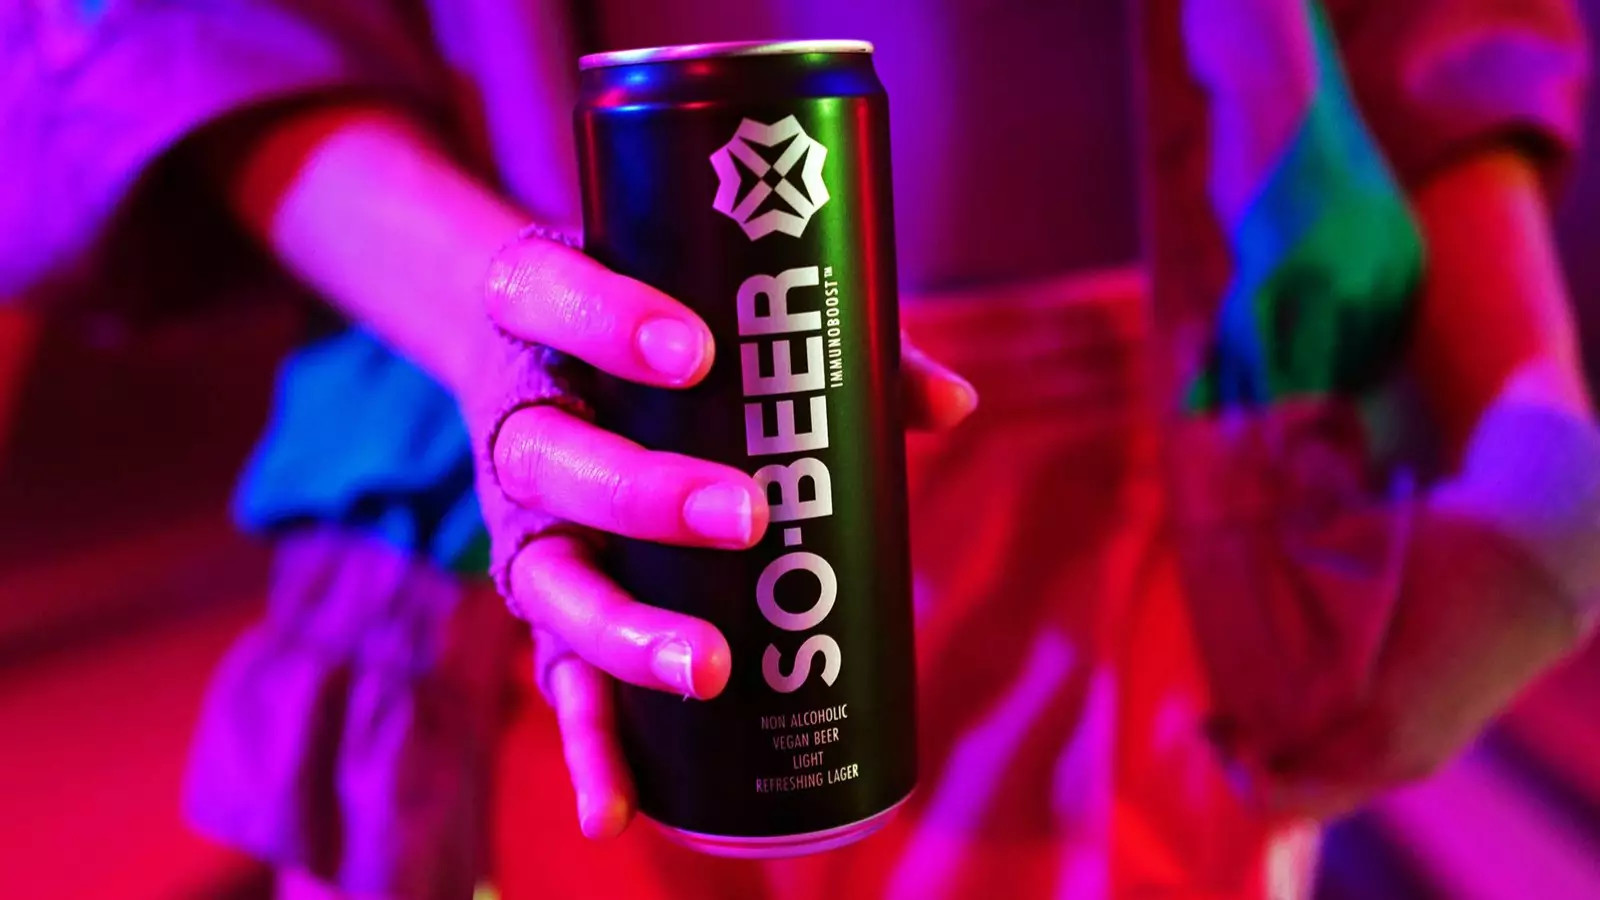 Dry January Just Got A Load Better with So.Beer's New Music Video